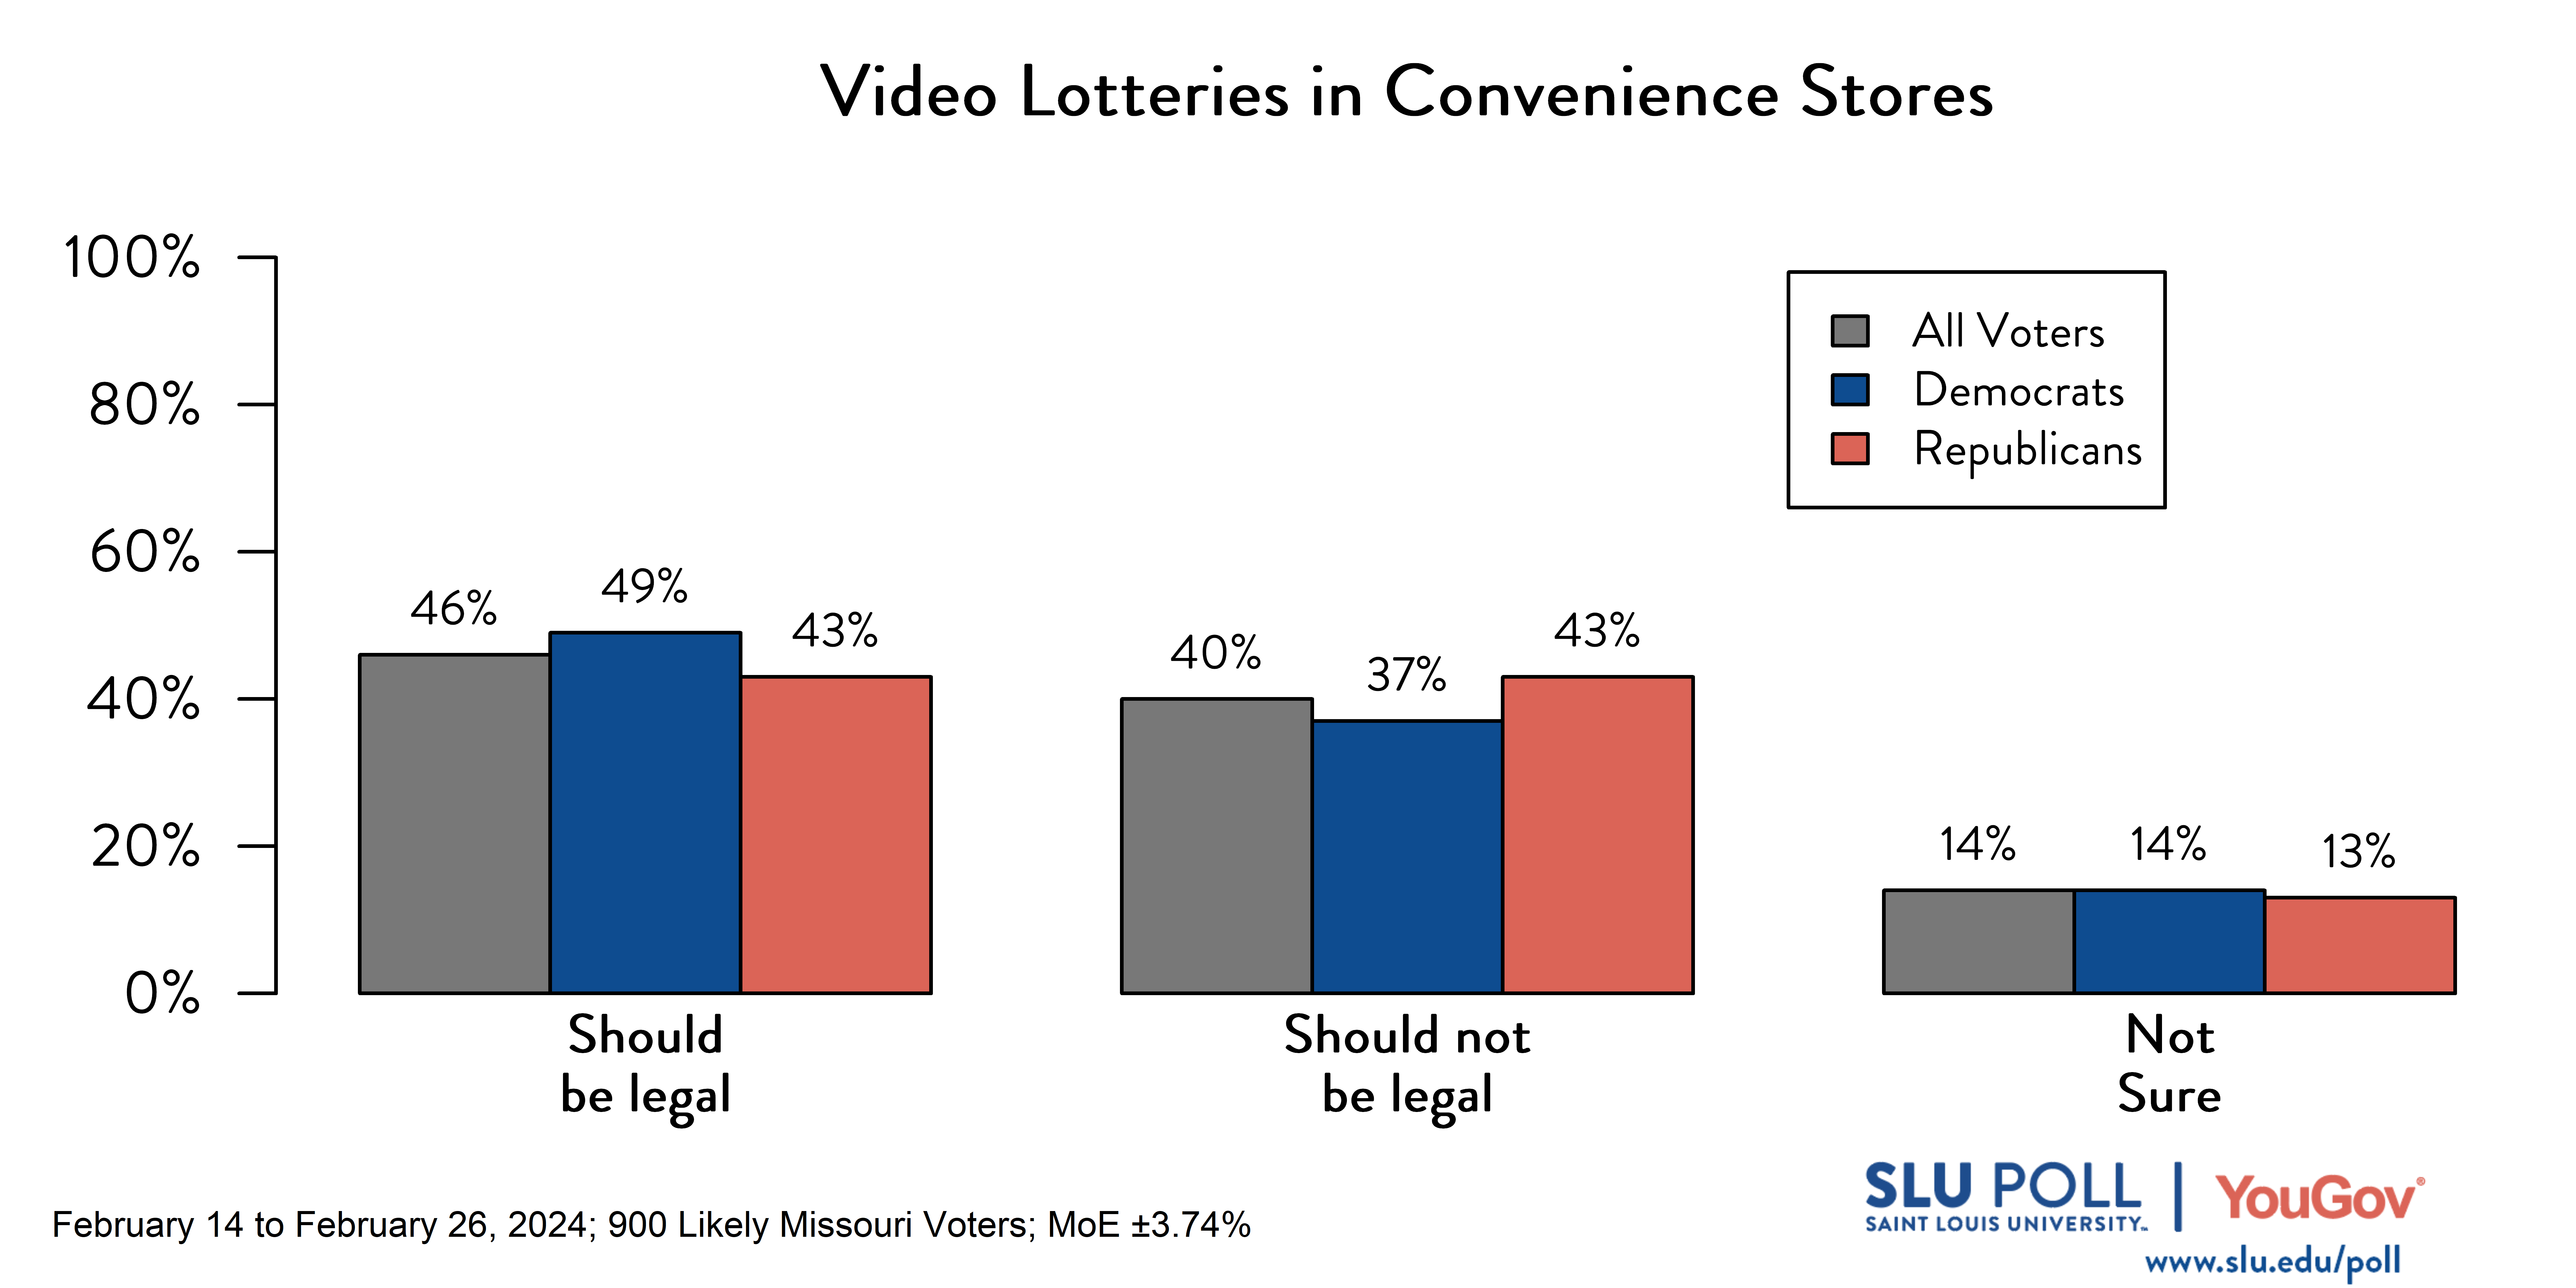 Likely voters' responses to 'Do you think the following should be legal in the state of Missouri for those who are 21 years old or older…Video lottery gaming machines in convenience stores?': 46% Should be legal, 40% Should not be legal, and 14% Not Sure. Democratic voters' responses: ' 49% Should be legal, 37% Should not be legal, and 14% Not Sure. Republican voters' responses:  43% Should be legal, 43% Should not be legal, and 13% Not Sure.